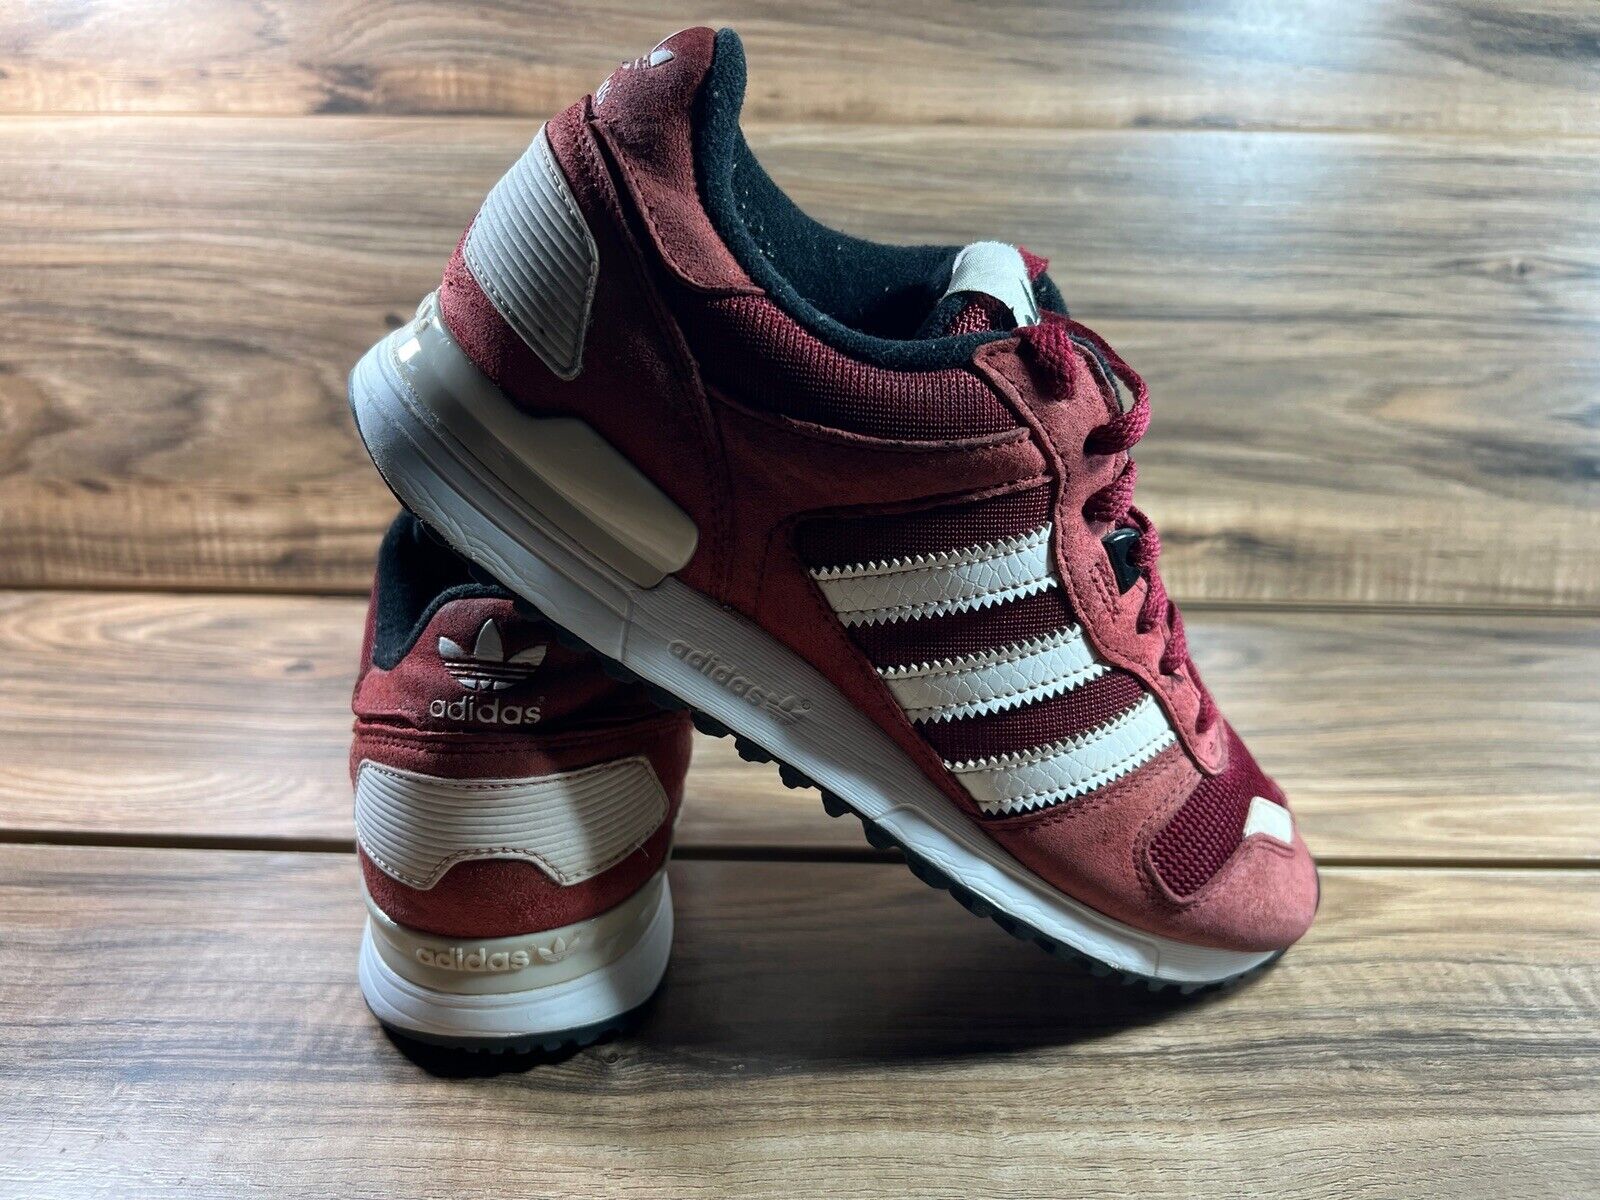 ADIDAS ZX 700 Scarlet Mens Classic Sneakers Shoes Size 8 (B24840)